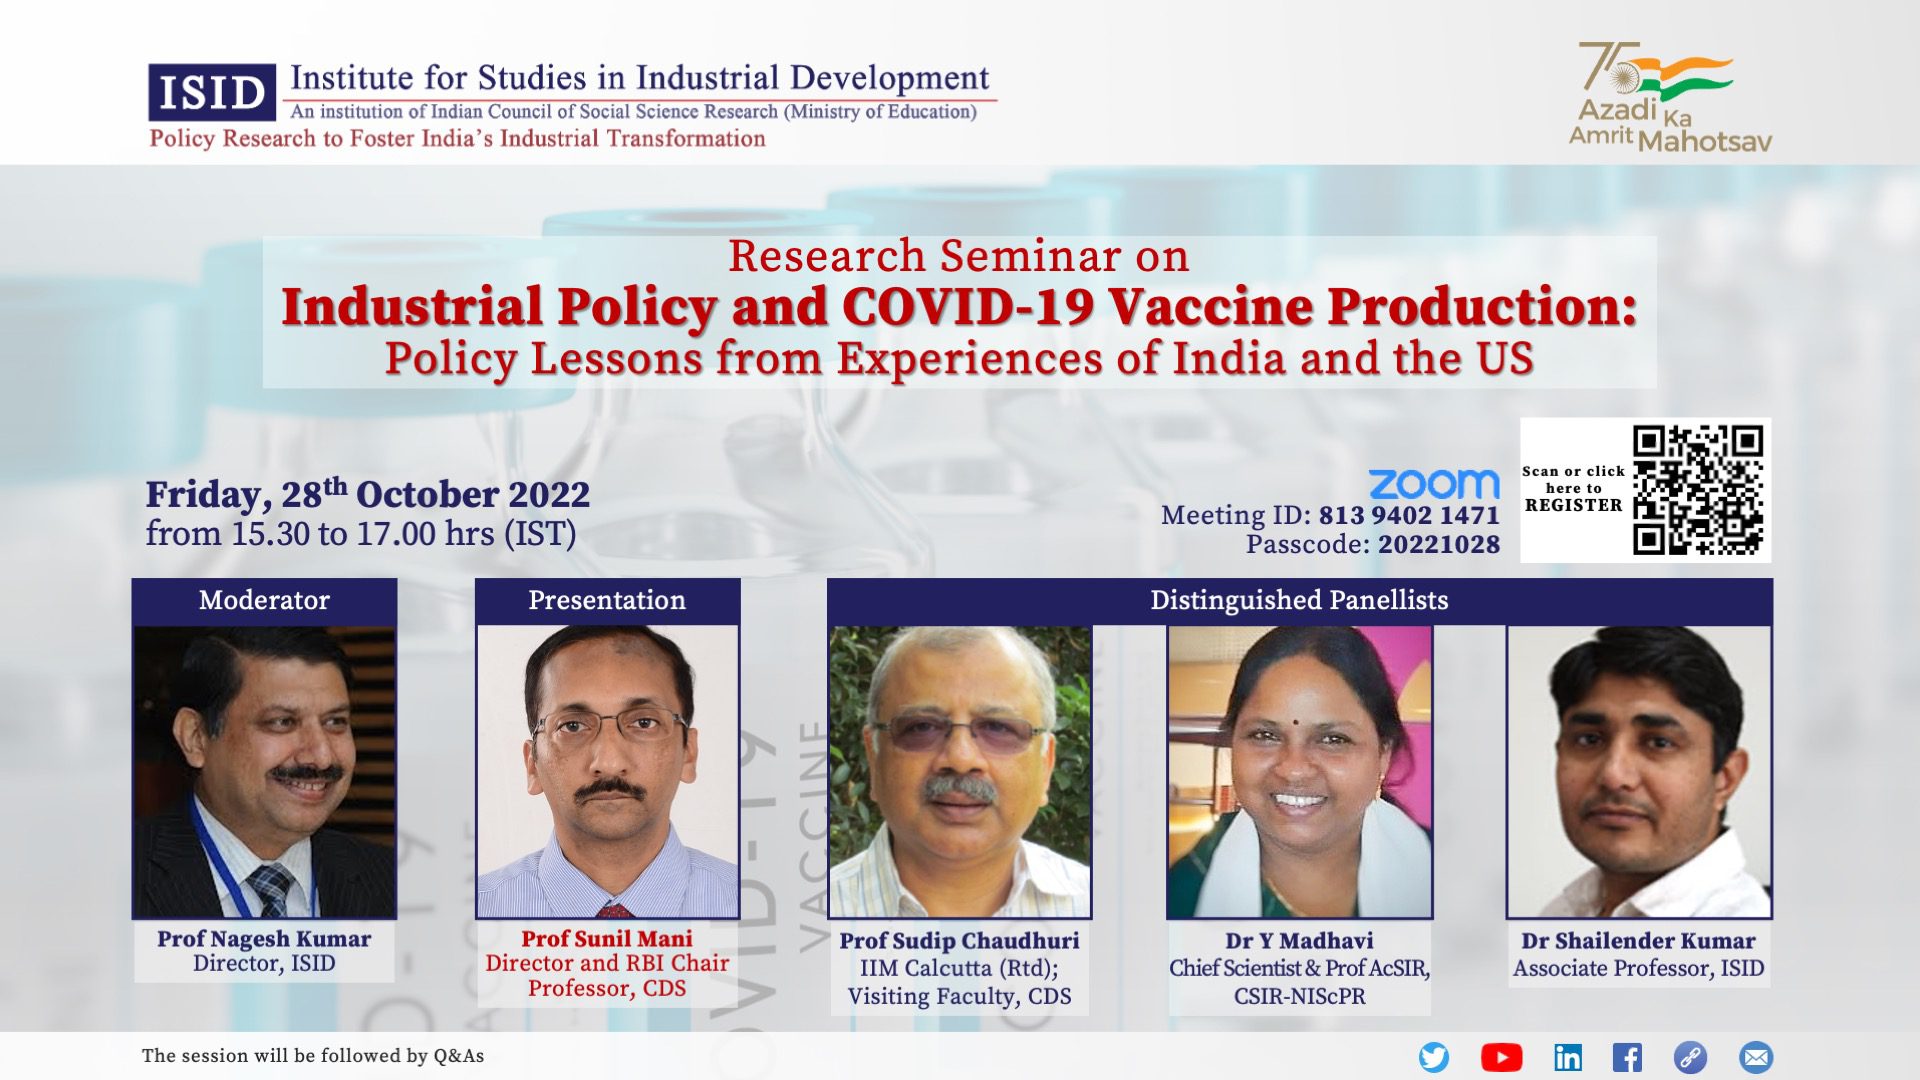 Research Seminar on Industrial Policy and COVID-19 Vaccine Production